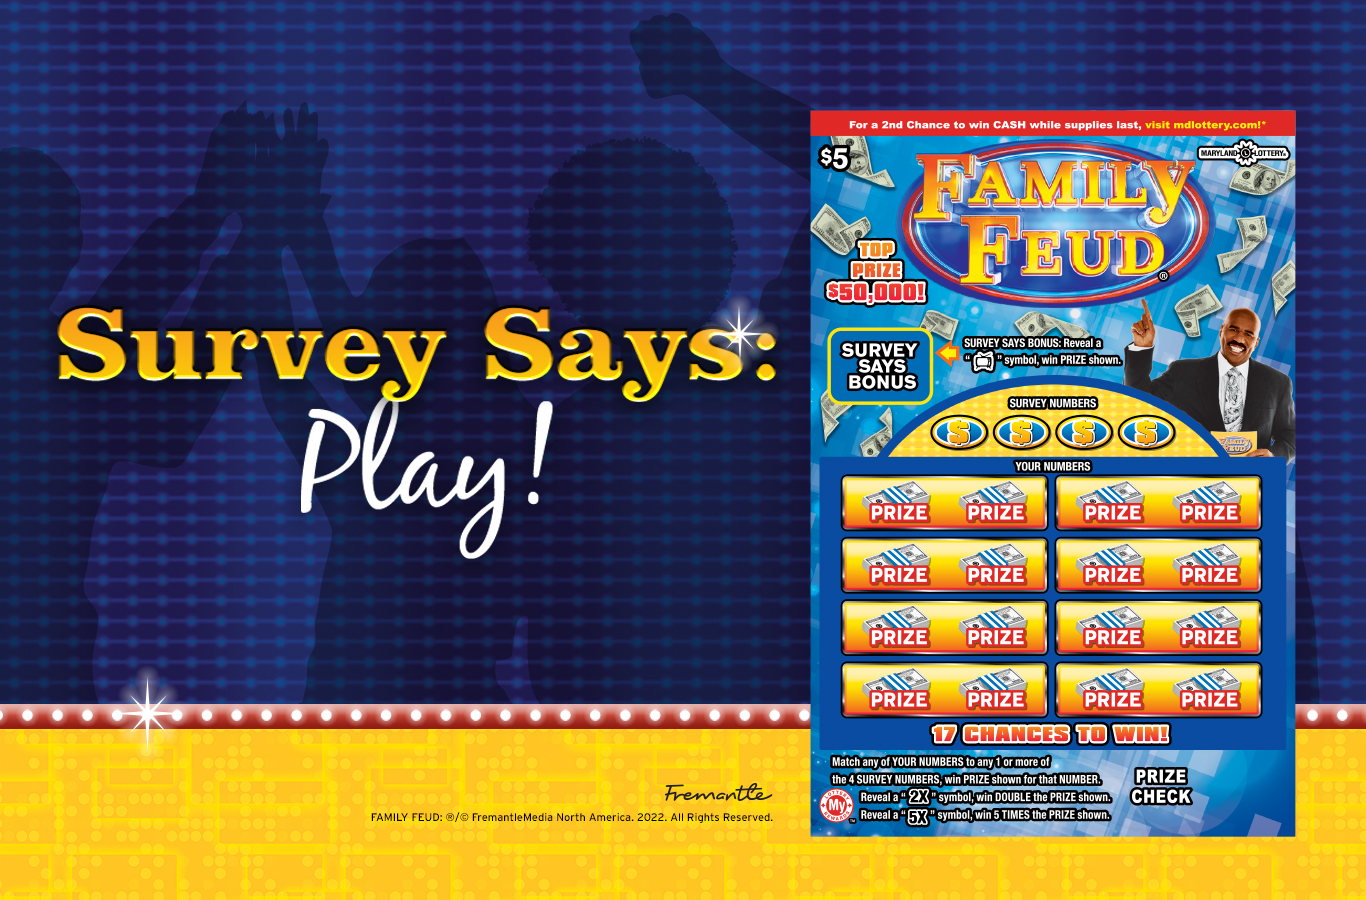 Survey says: Play Family Feud® Scratch-Offs! You could win up to $50,000 or great second-chance cash prizes.